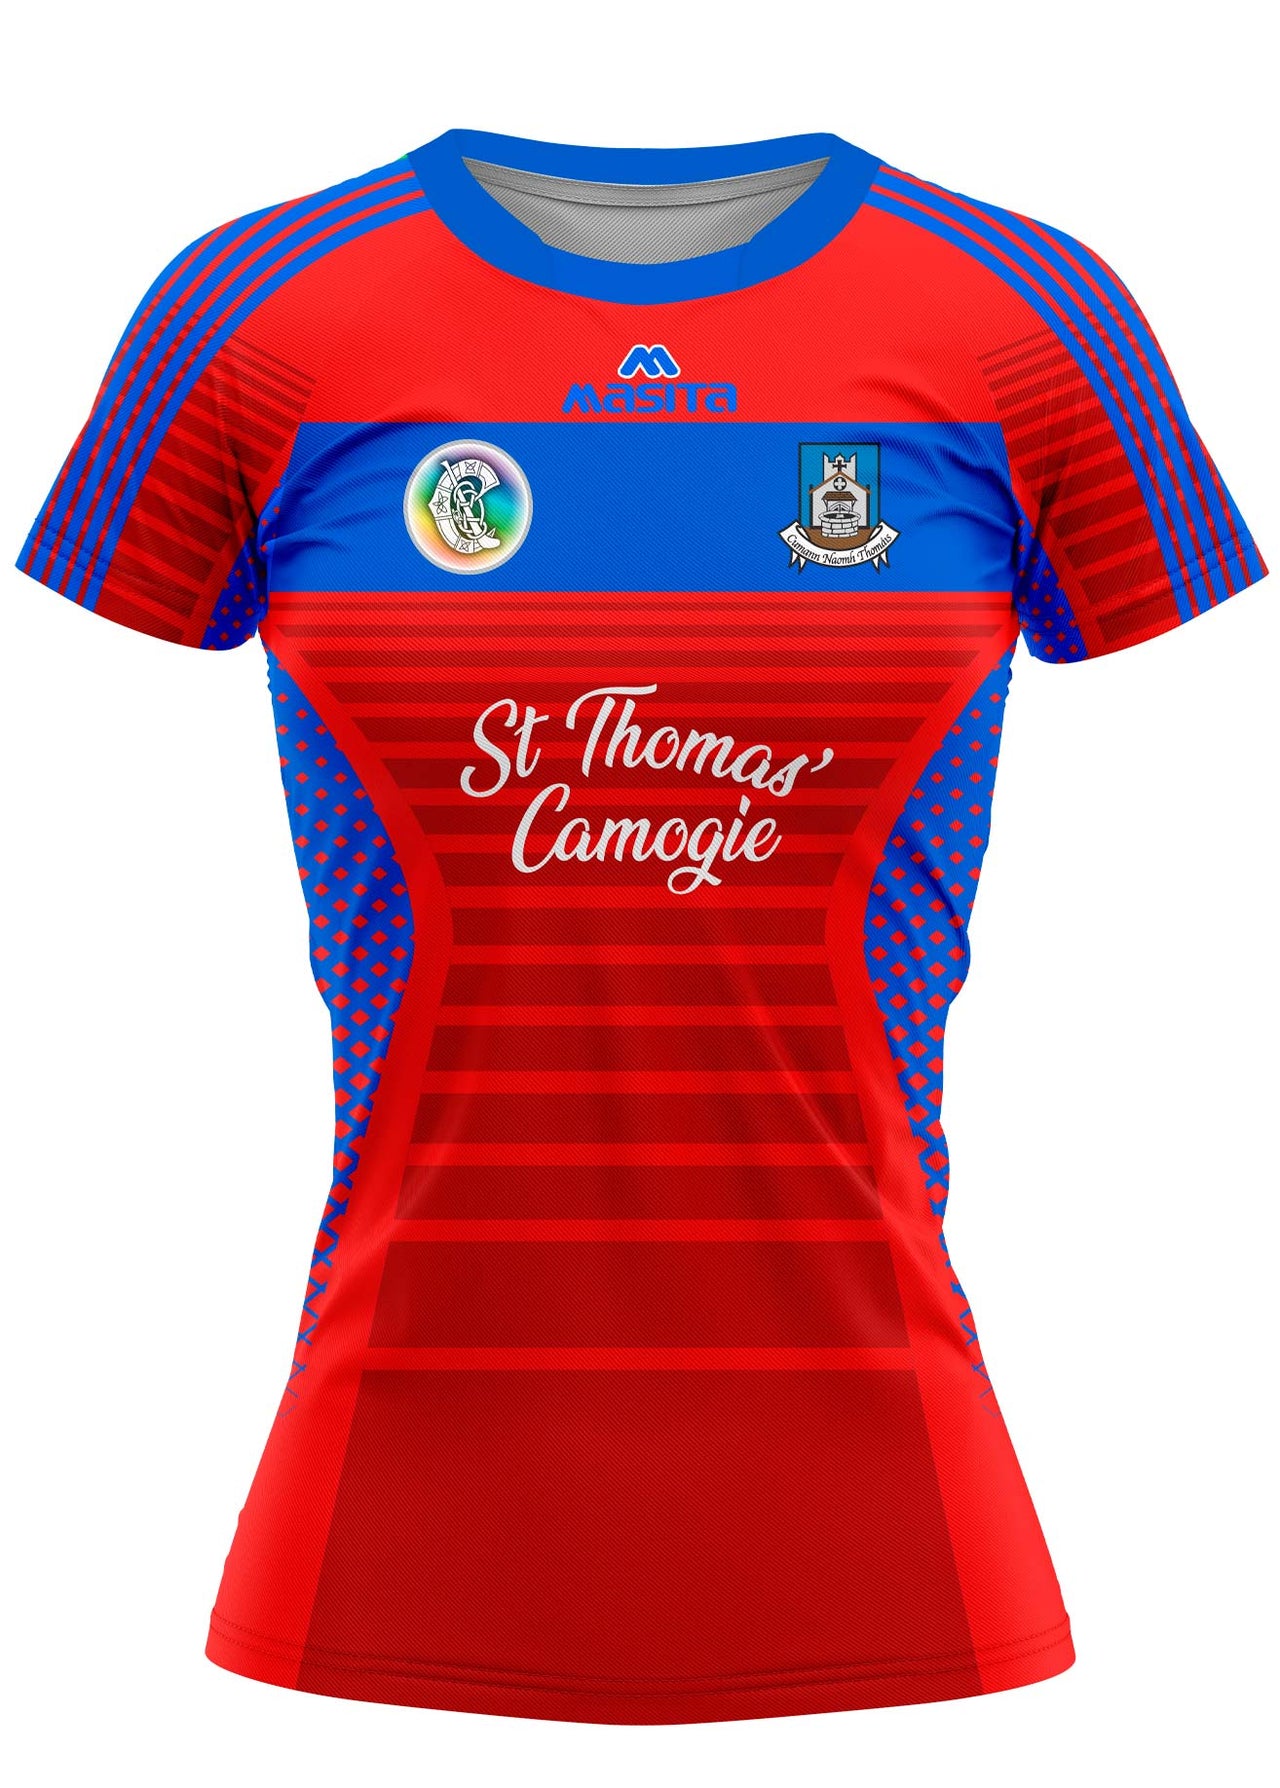 St Thomas' Camogie Home Jersey Regular Fit Adult